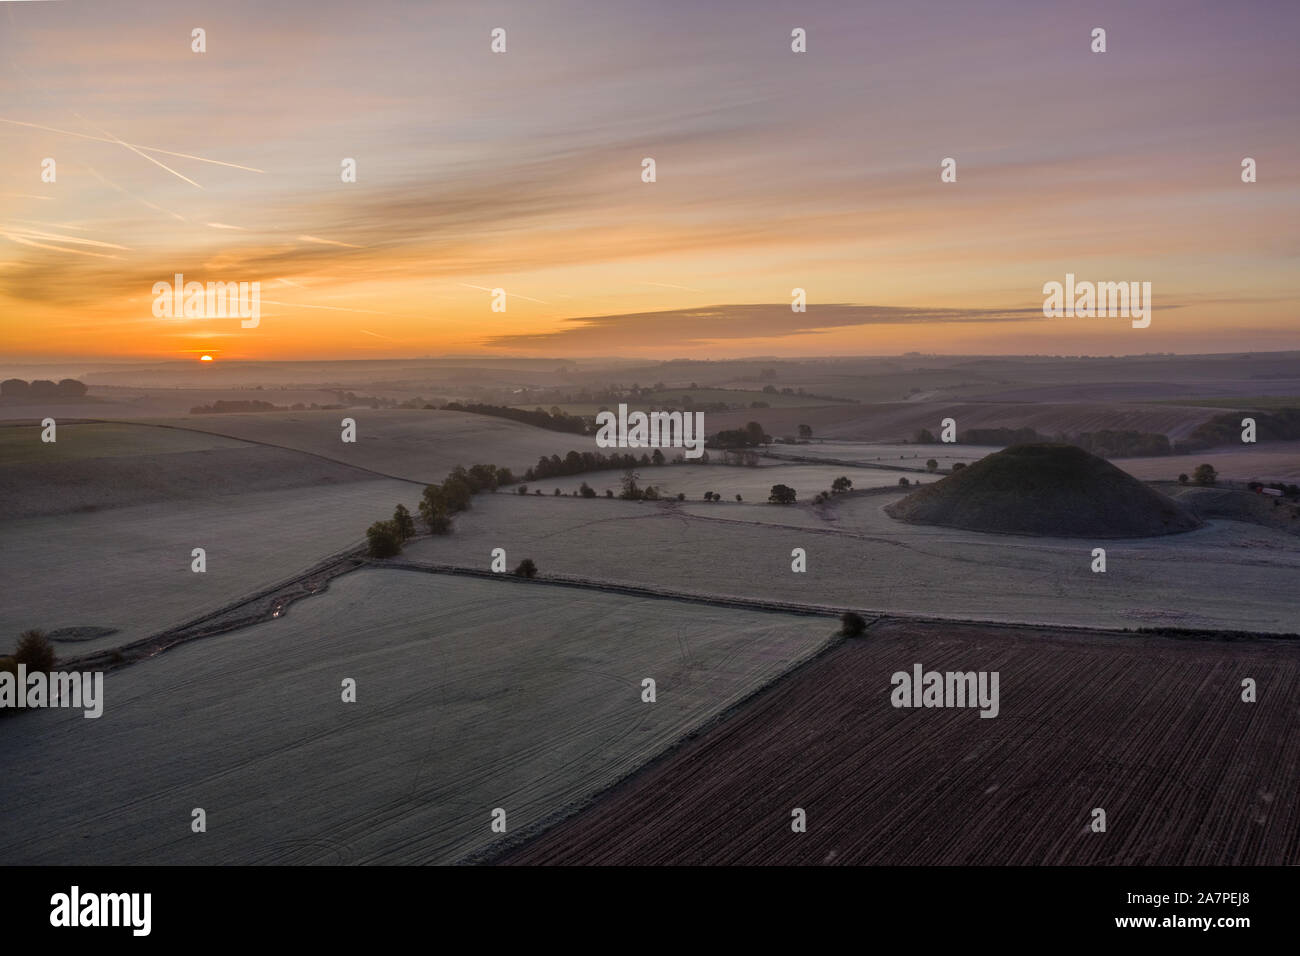 Silbury Hill, Nr Avebury, Wiltshire, UK. 28th October 2019. Drone image of a frosty red morning sky above the ancient man-made mound of Silbury Hill. Stock Photo